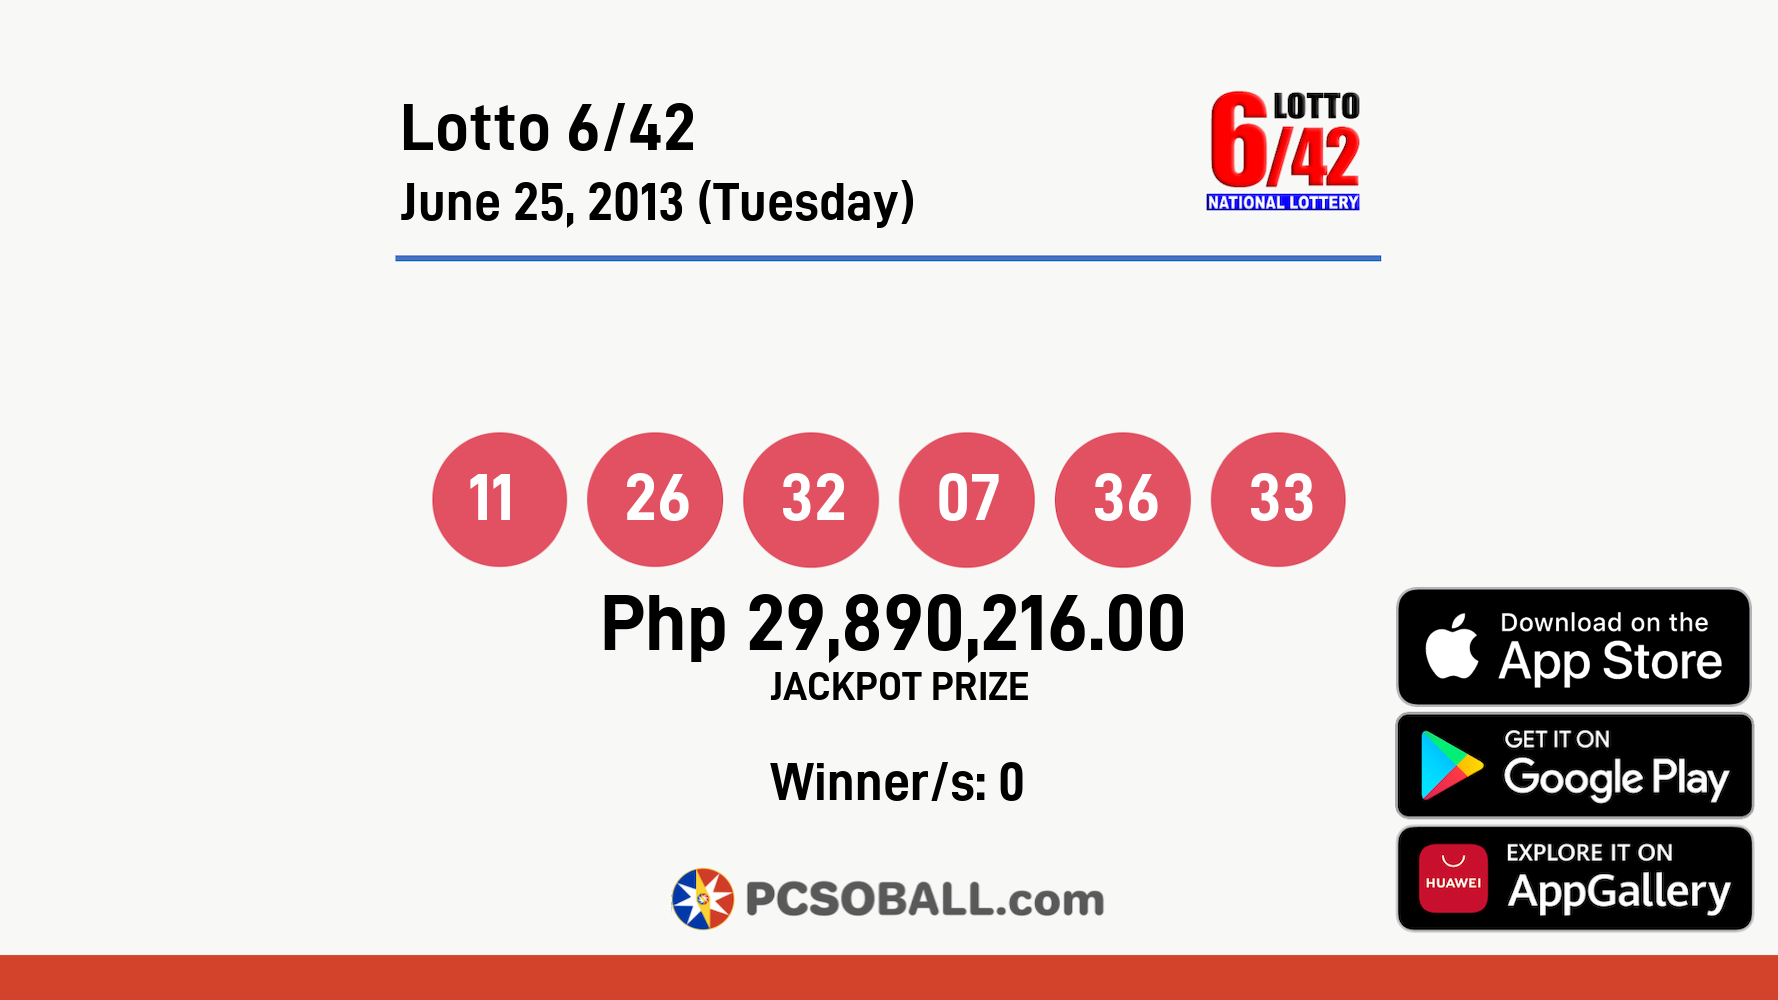 Lotto 6/42 June 25, 2013 (Tuesday) Result